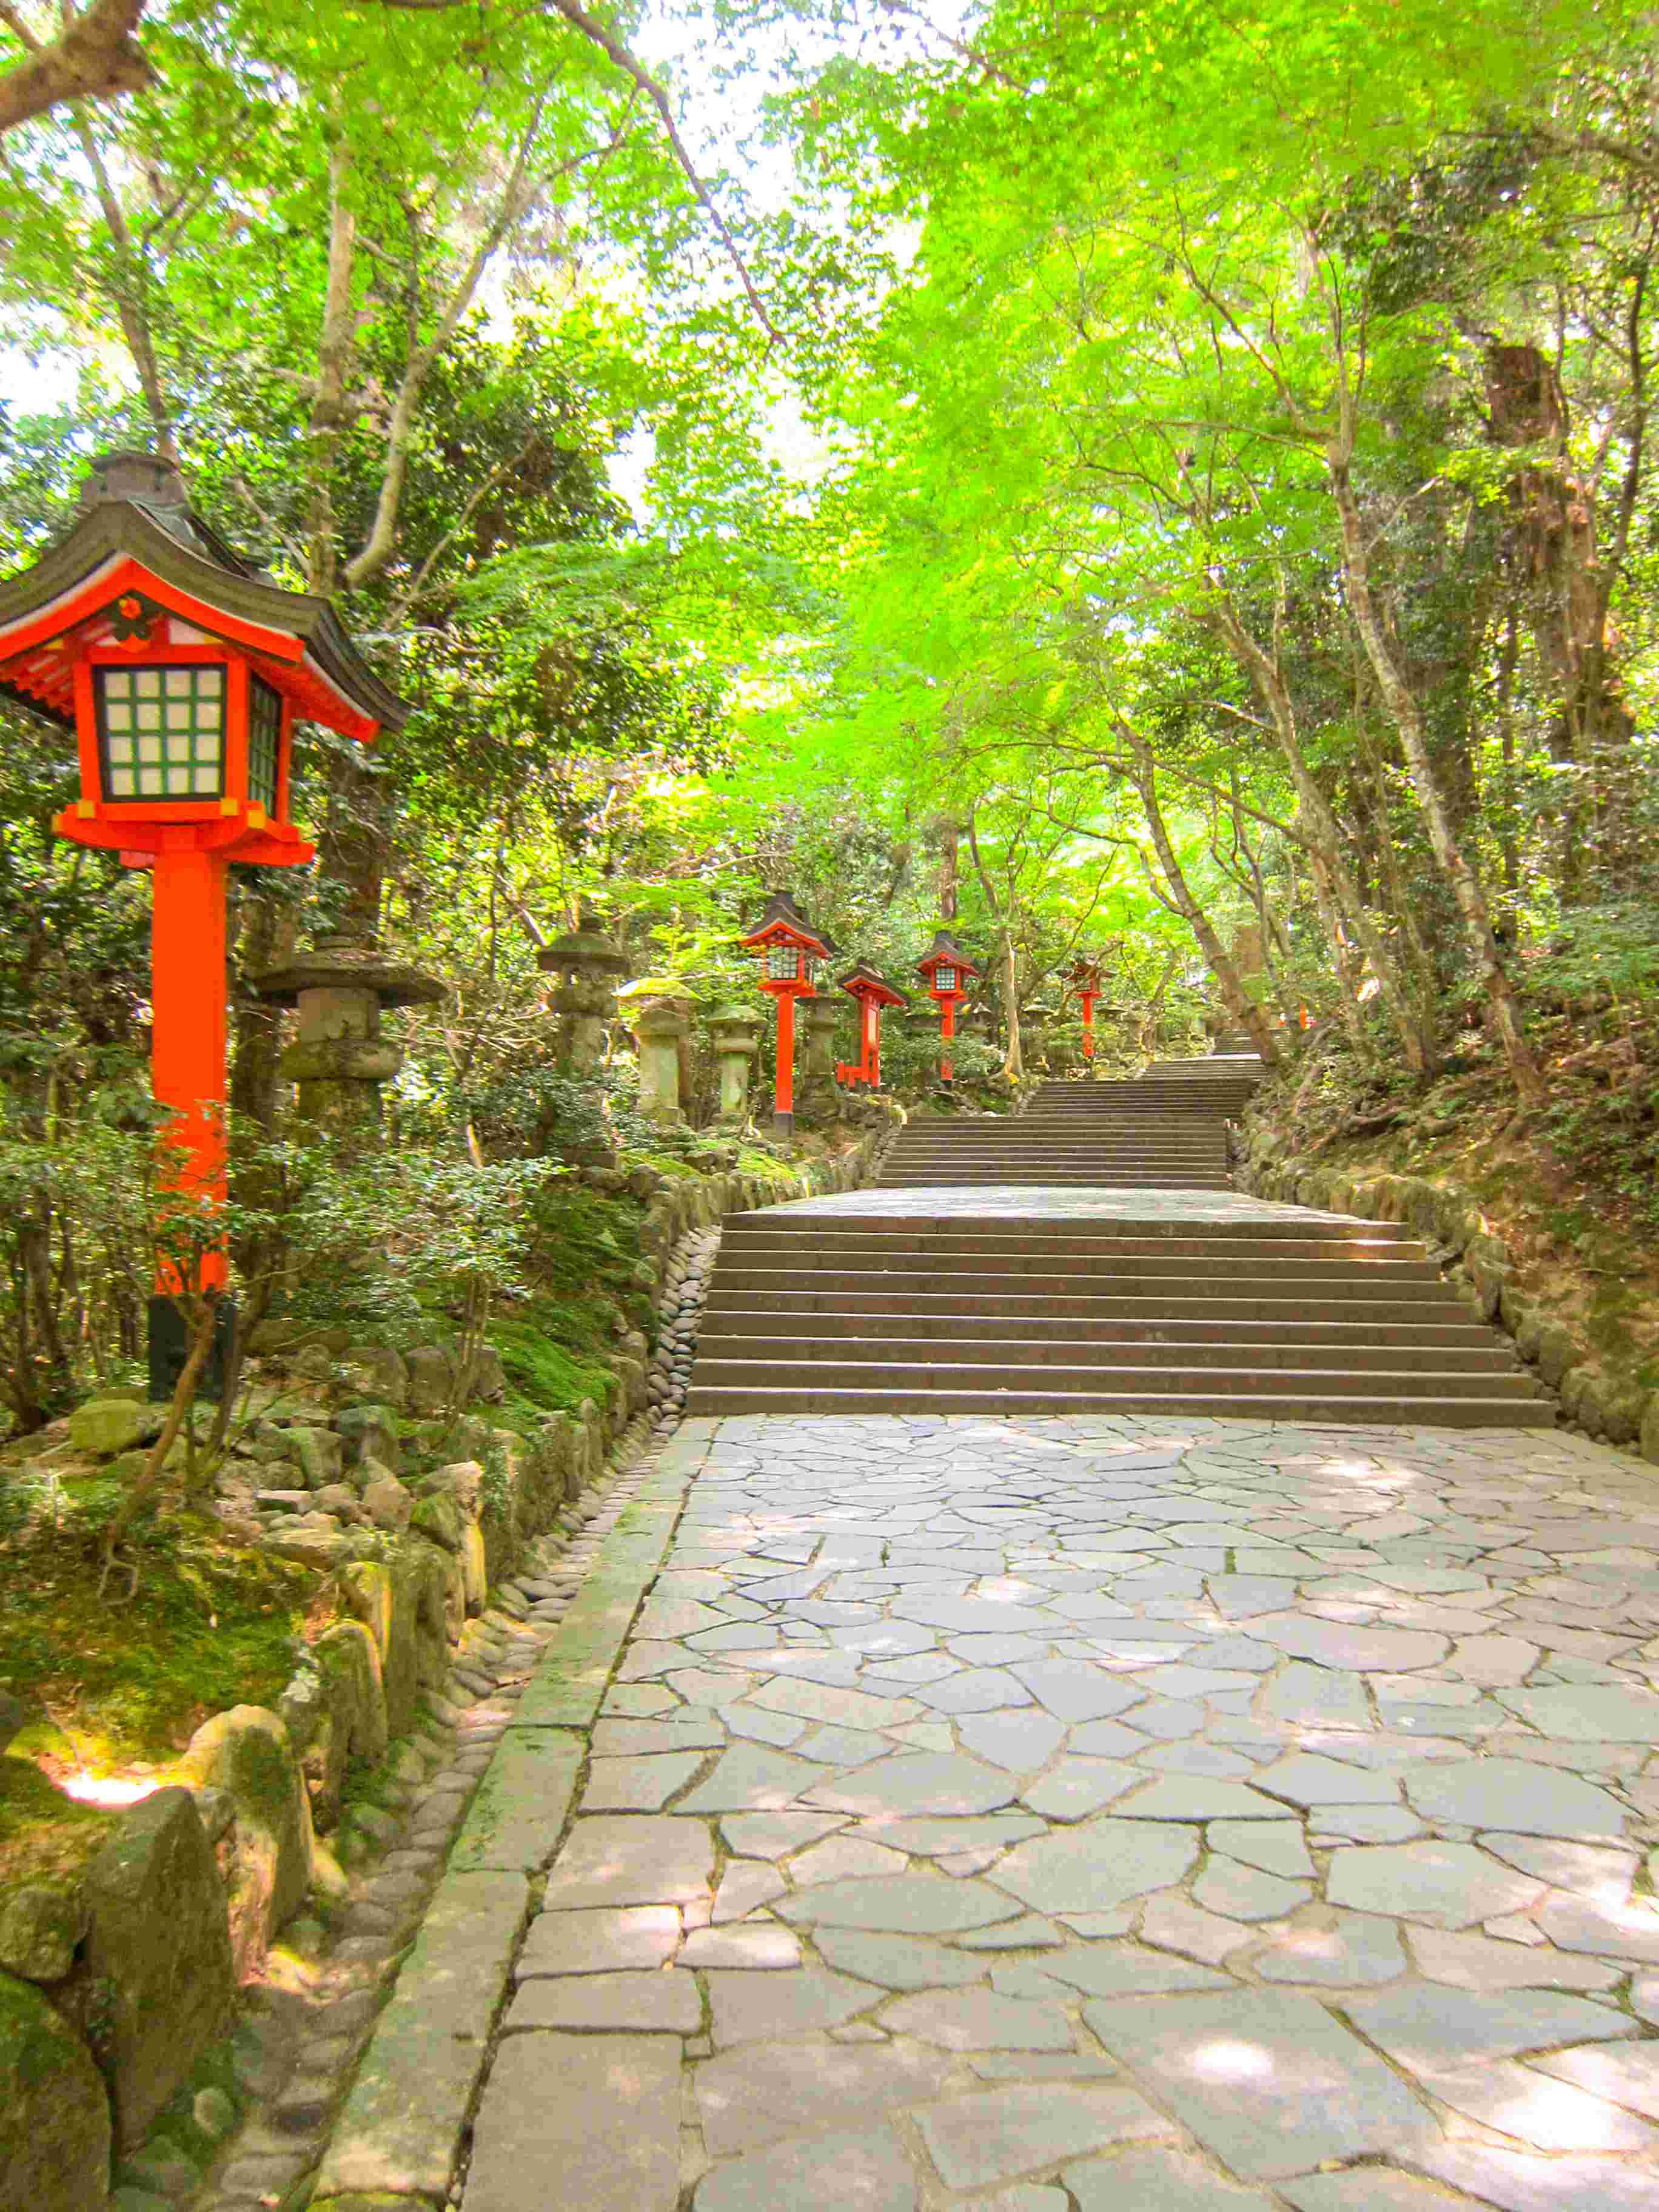 A scenic stairway to the main complex of Usa Jingū.